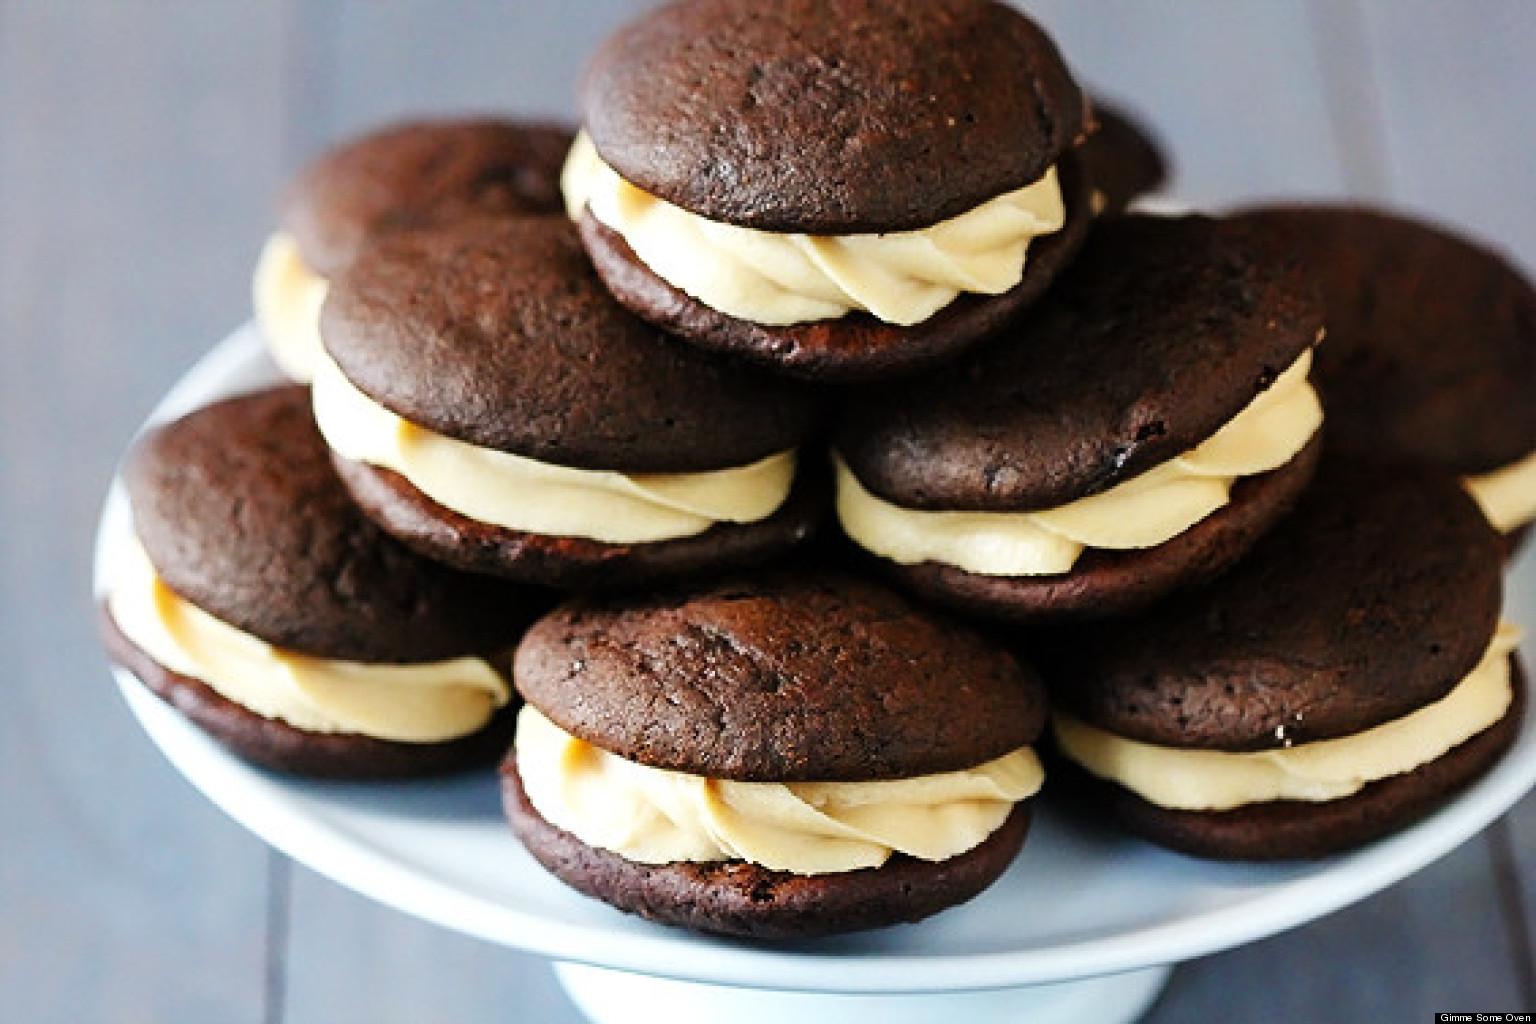 Whoopie Pie Recipes Prove This Dessert Is The Best Of All Worlds | HuffPost